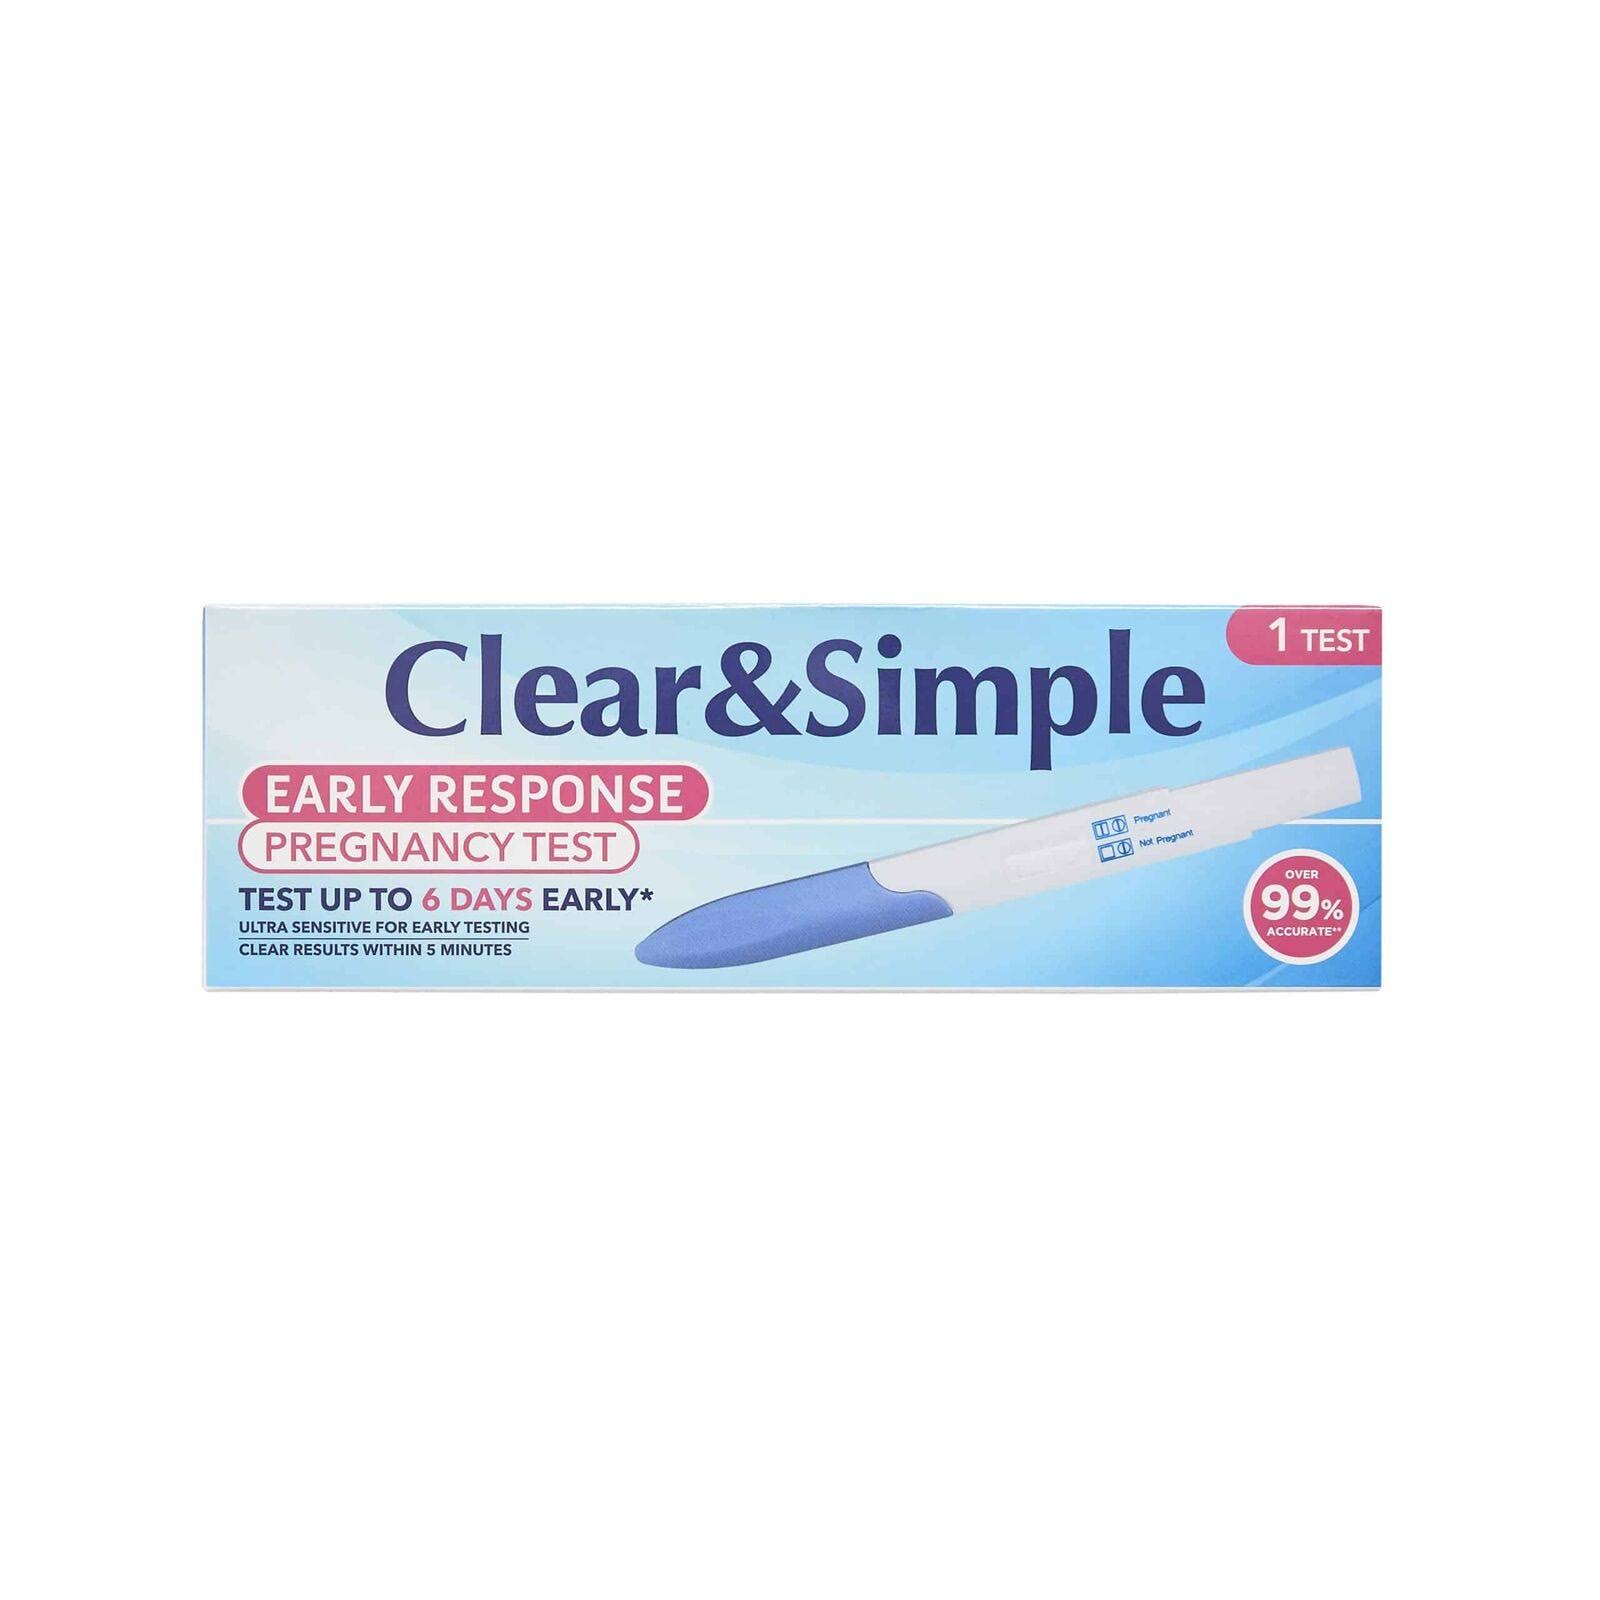 Clean and Simple Early Response Pregnancy Test 1 Test Ultra Sensitive